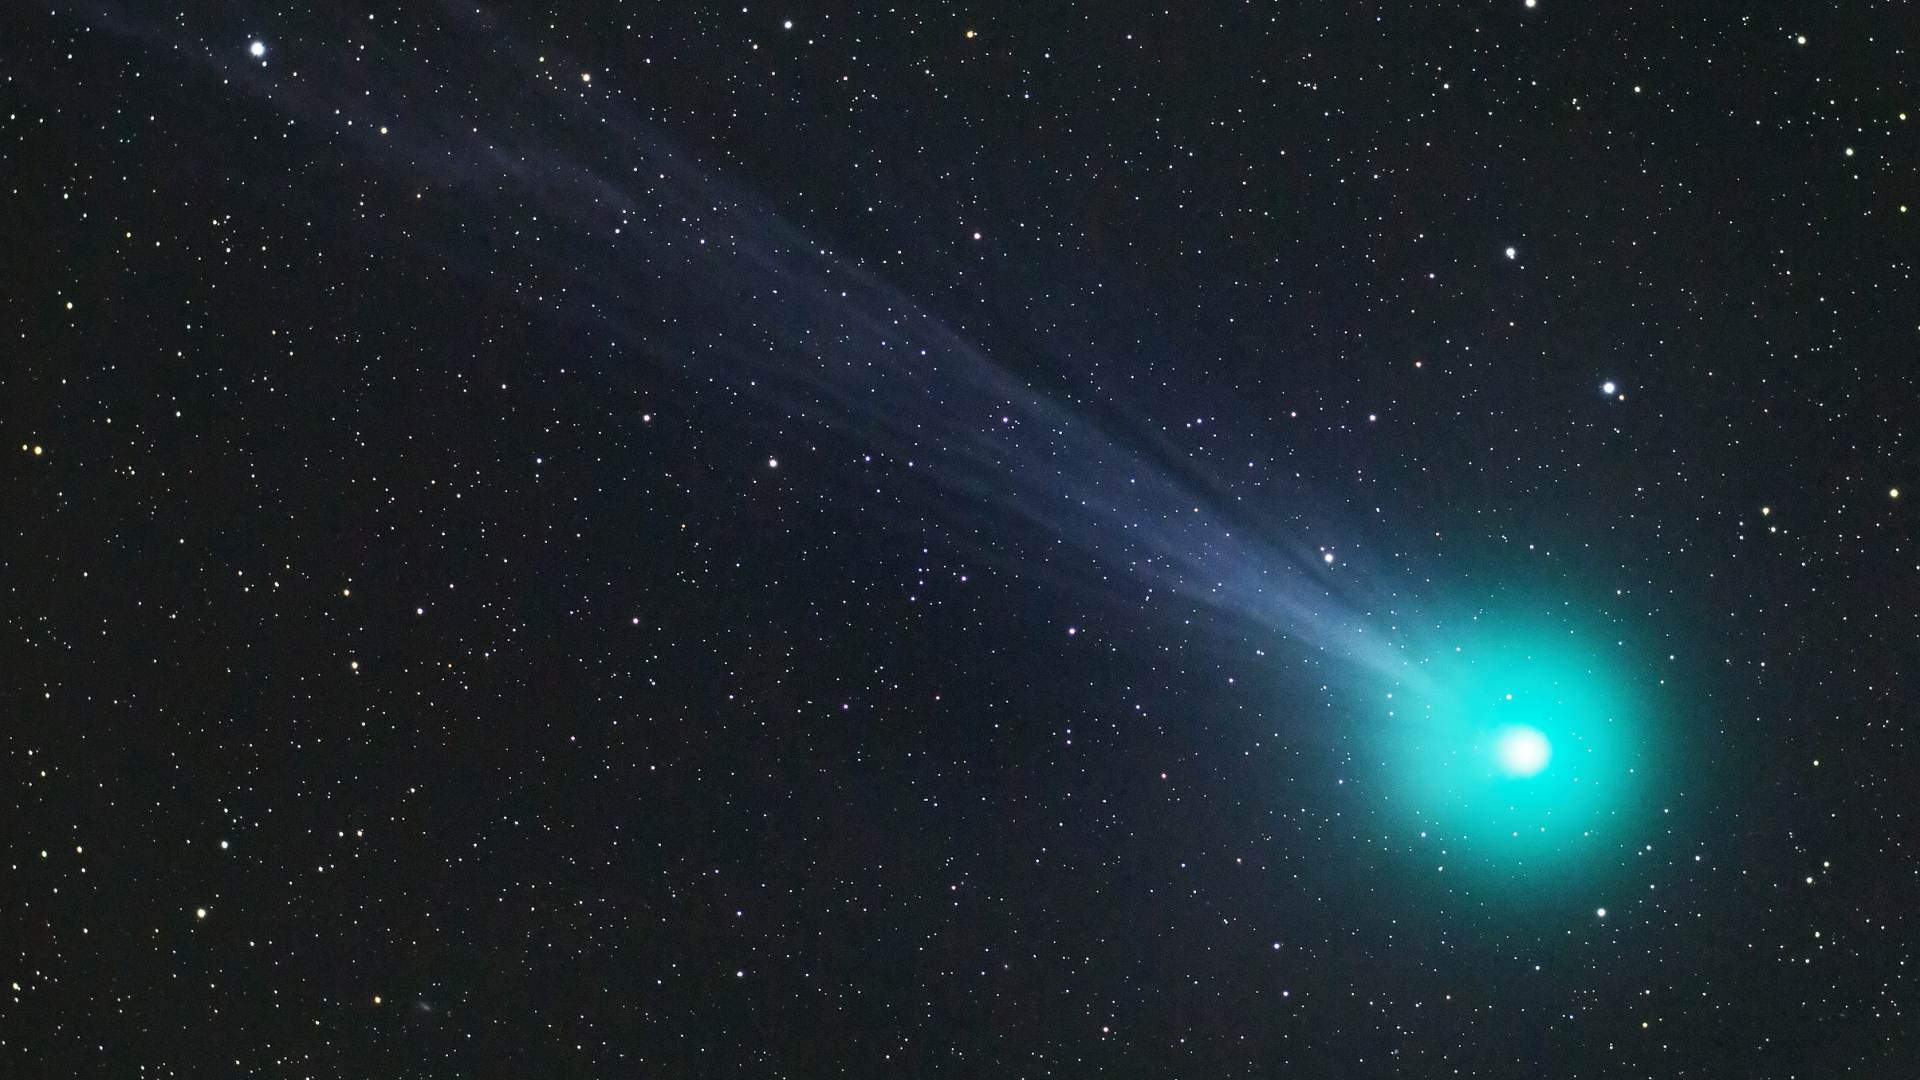 Green comet makes for stunning videos!